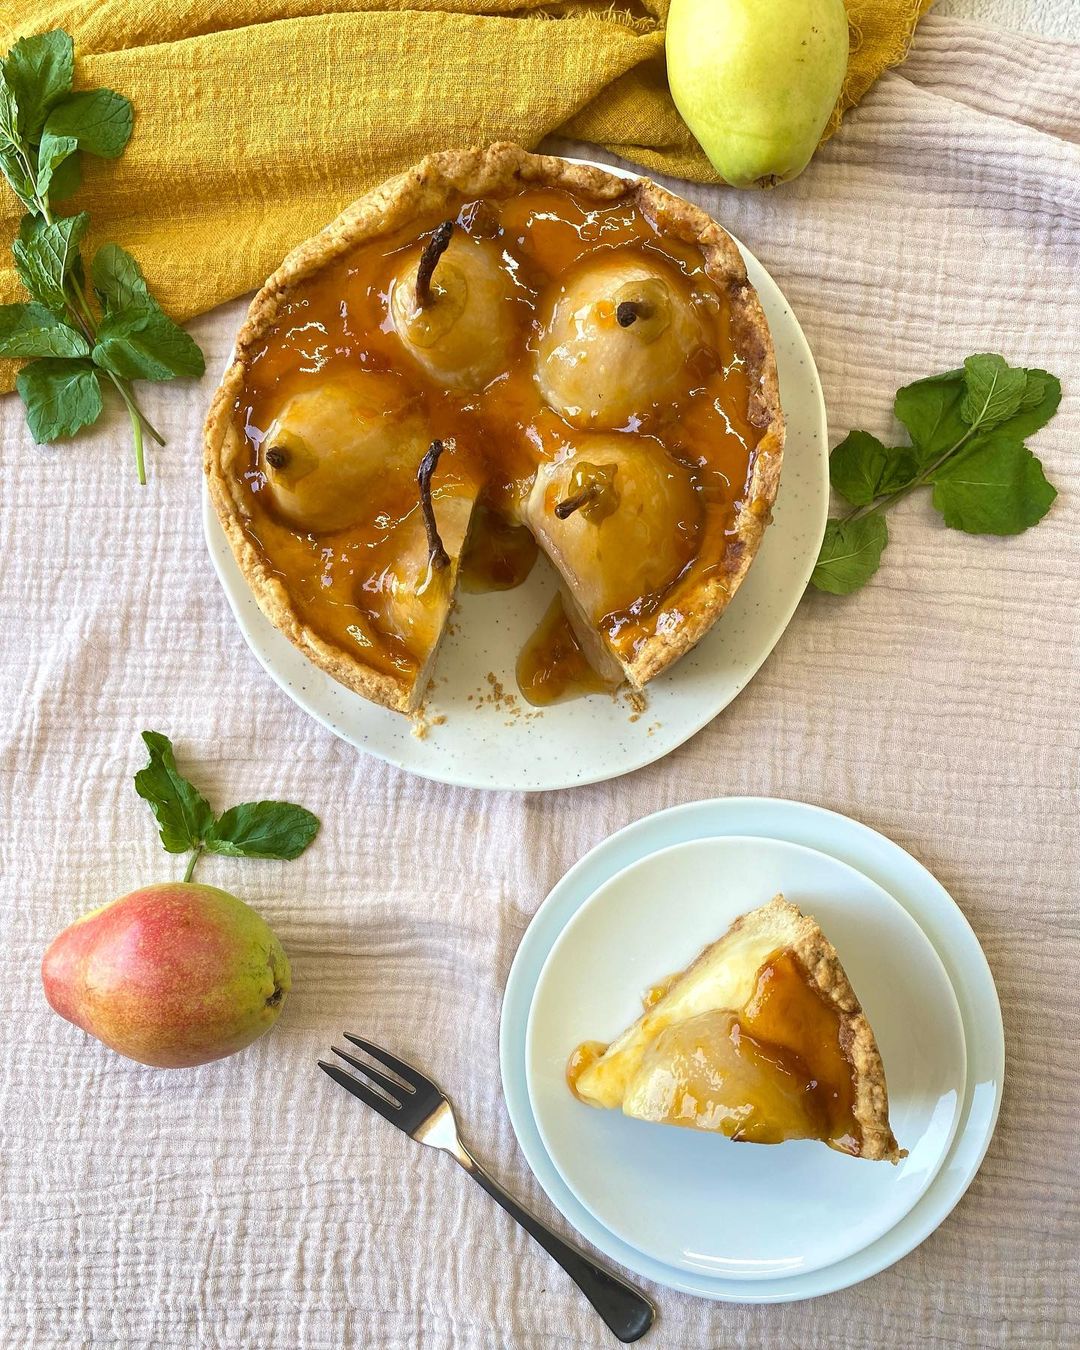 Pear tart with apricot jam